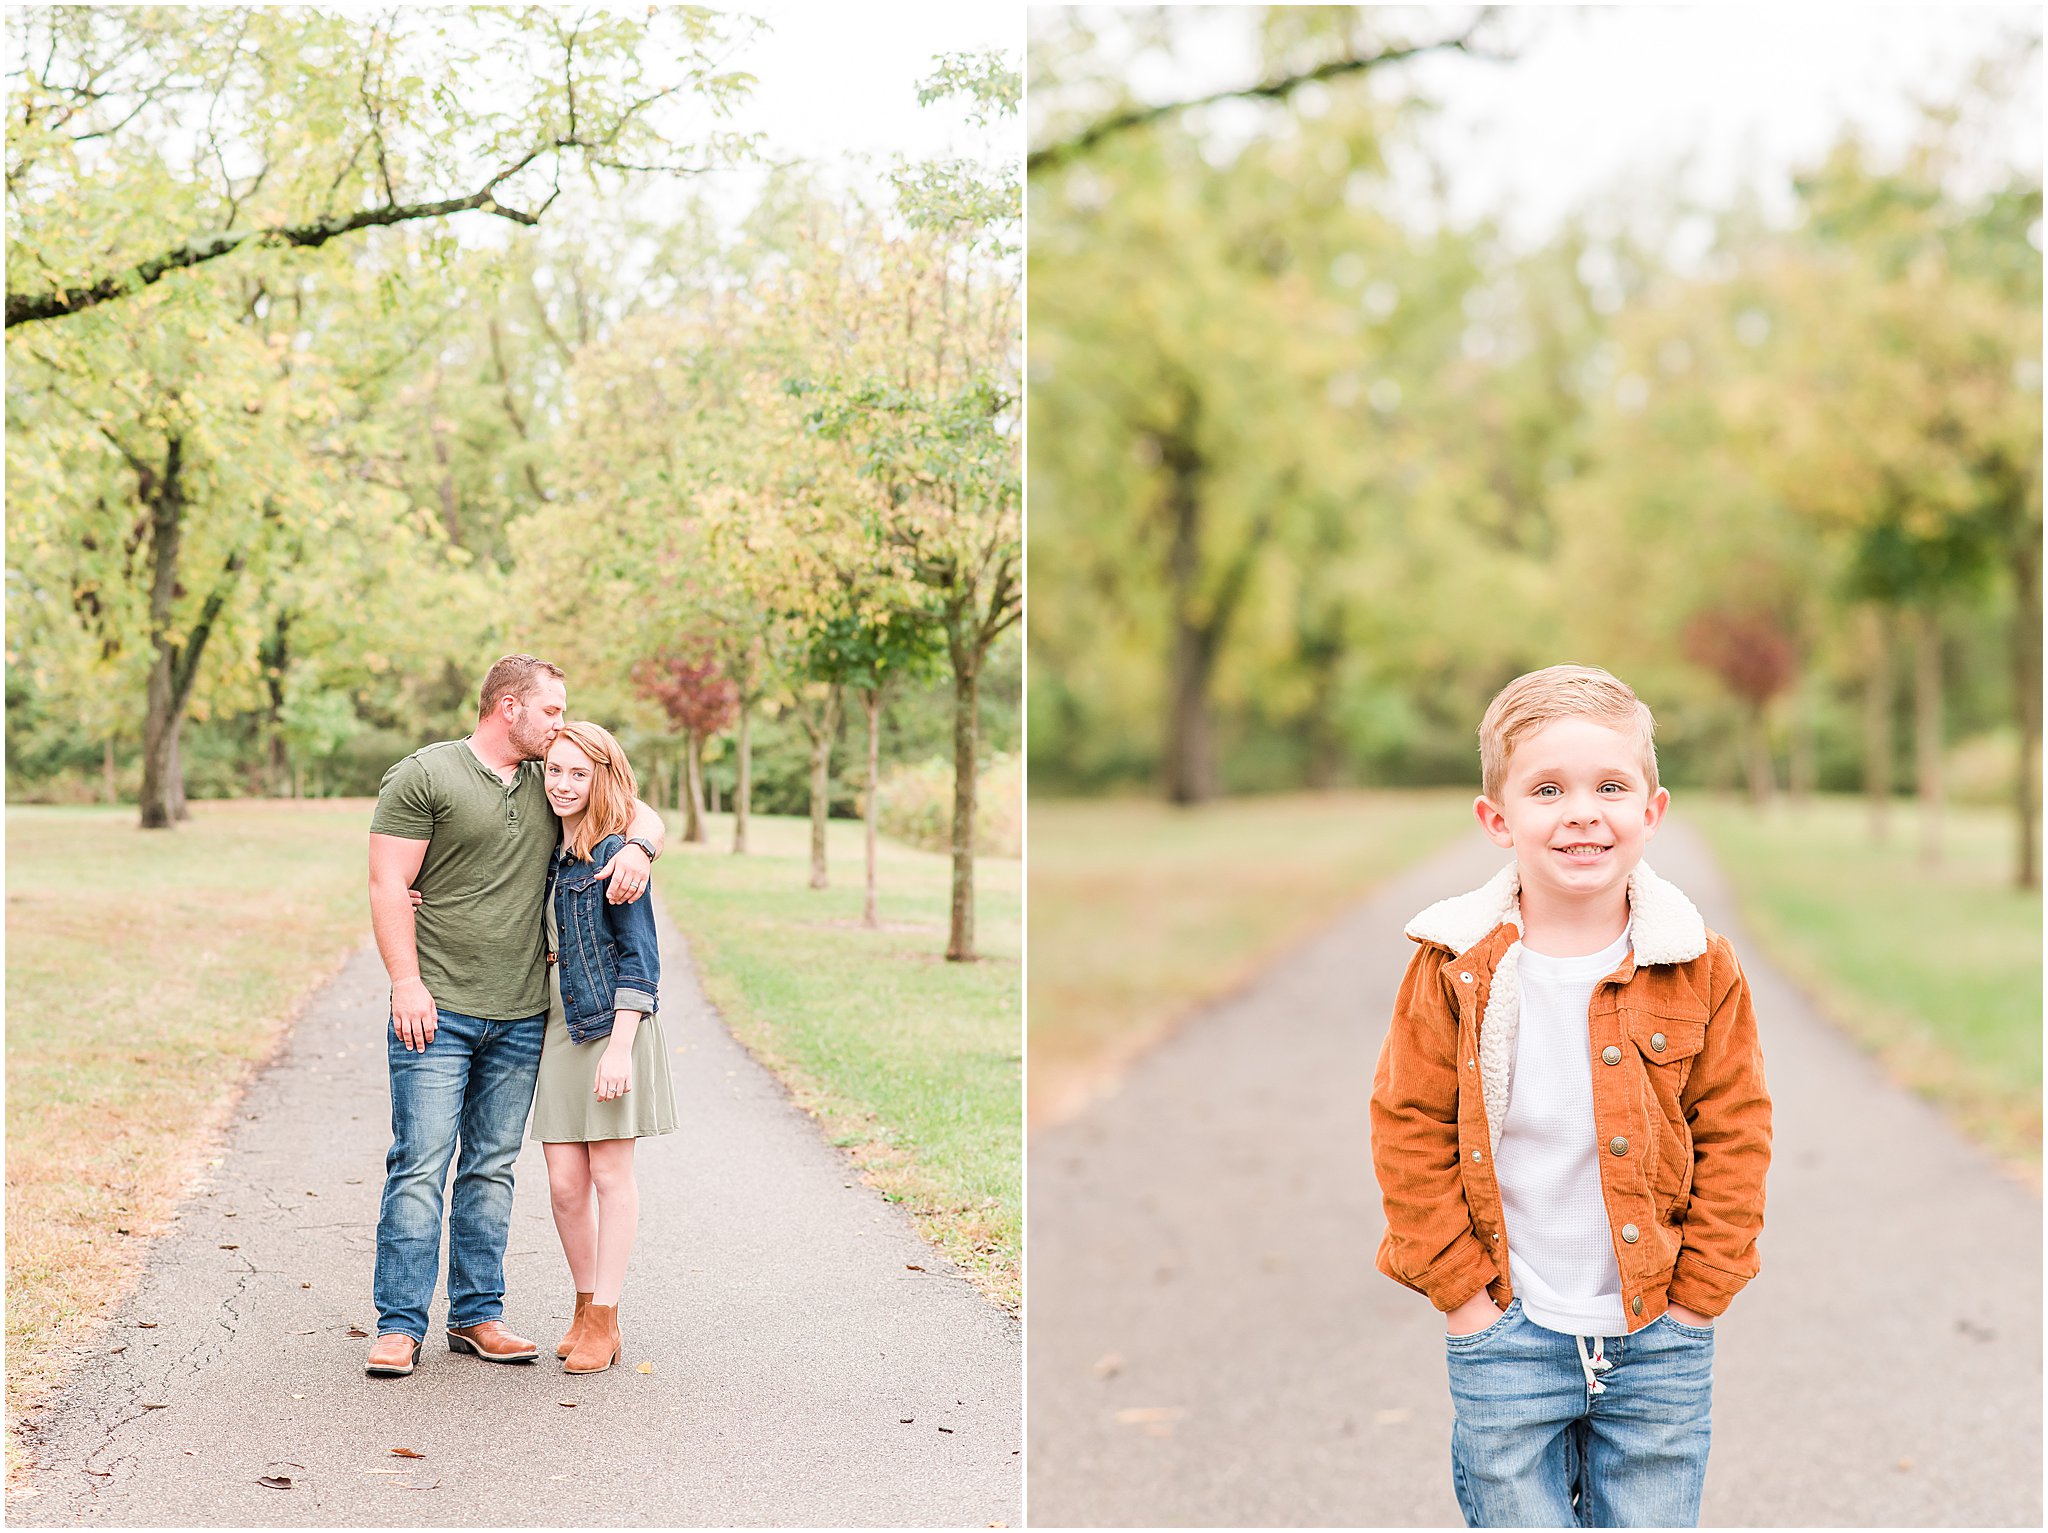 Toddler with hands in pockets smiling at camera during Southeastway Park family session